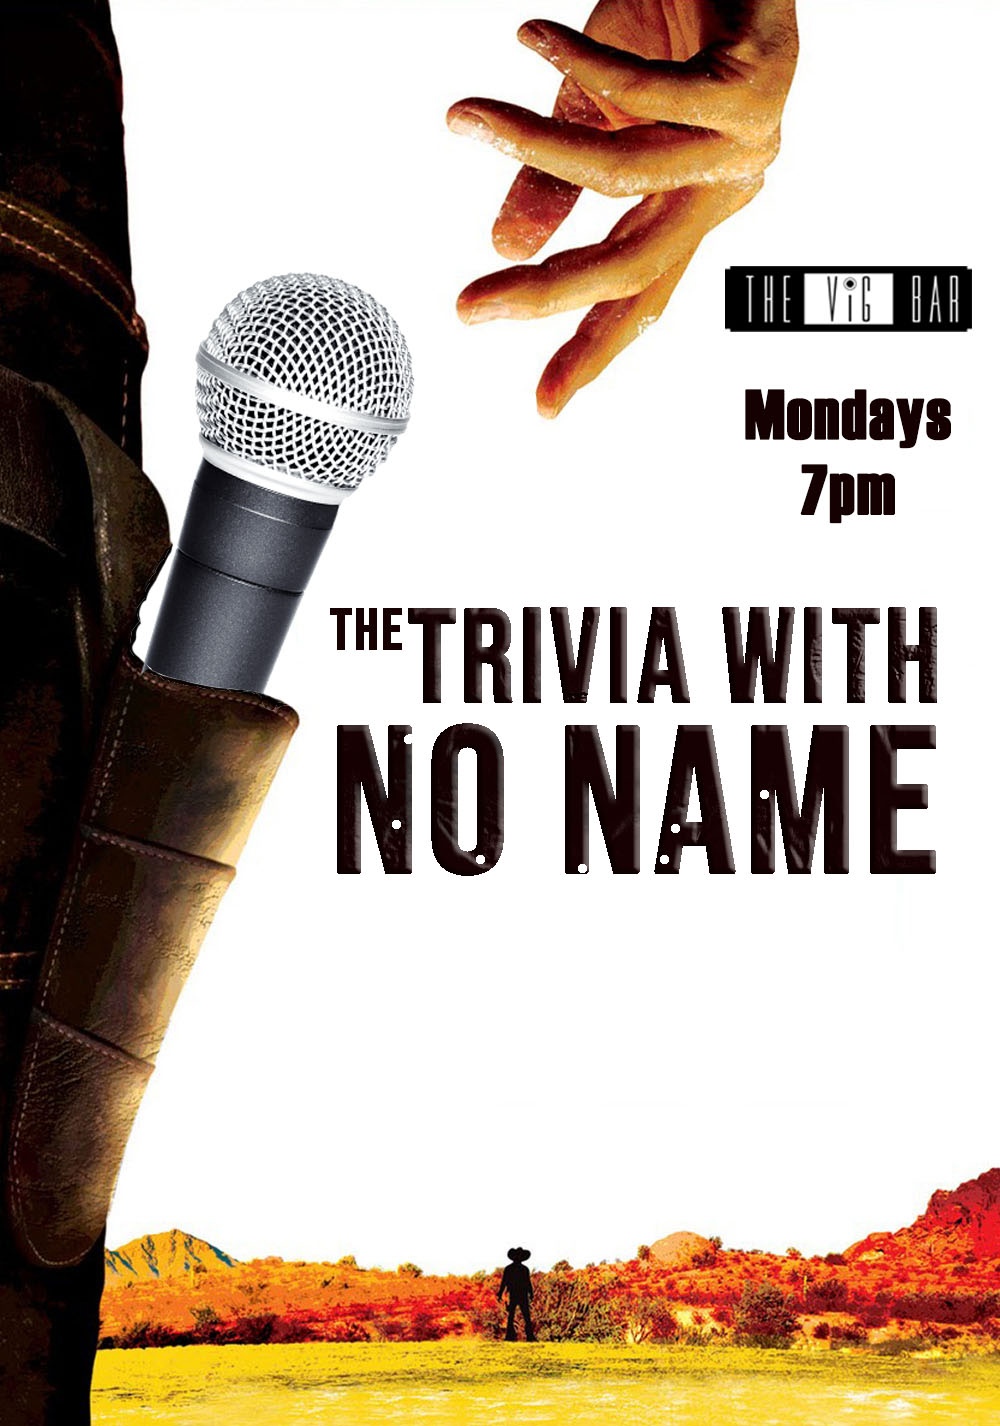 Flyer for Trivia Night Mondays 7pm